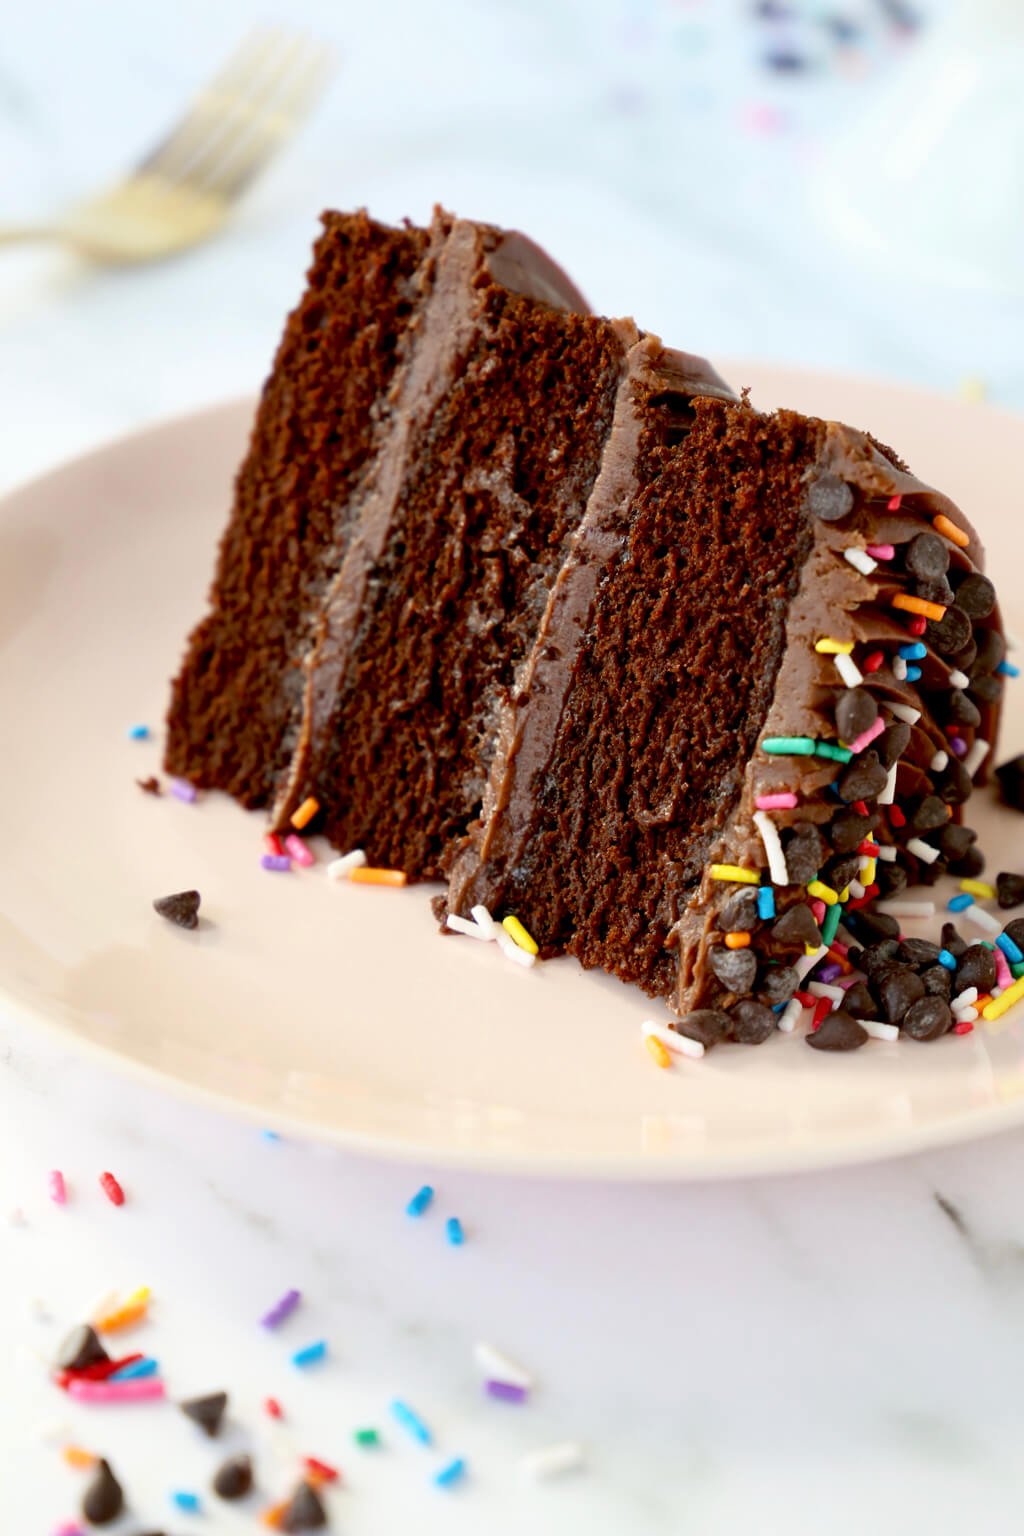 A slice of chocolate layer cake frosted with chocolate buttercream frosting